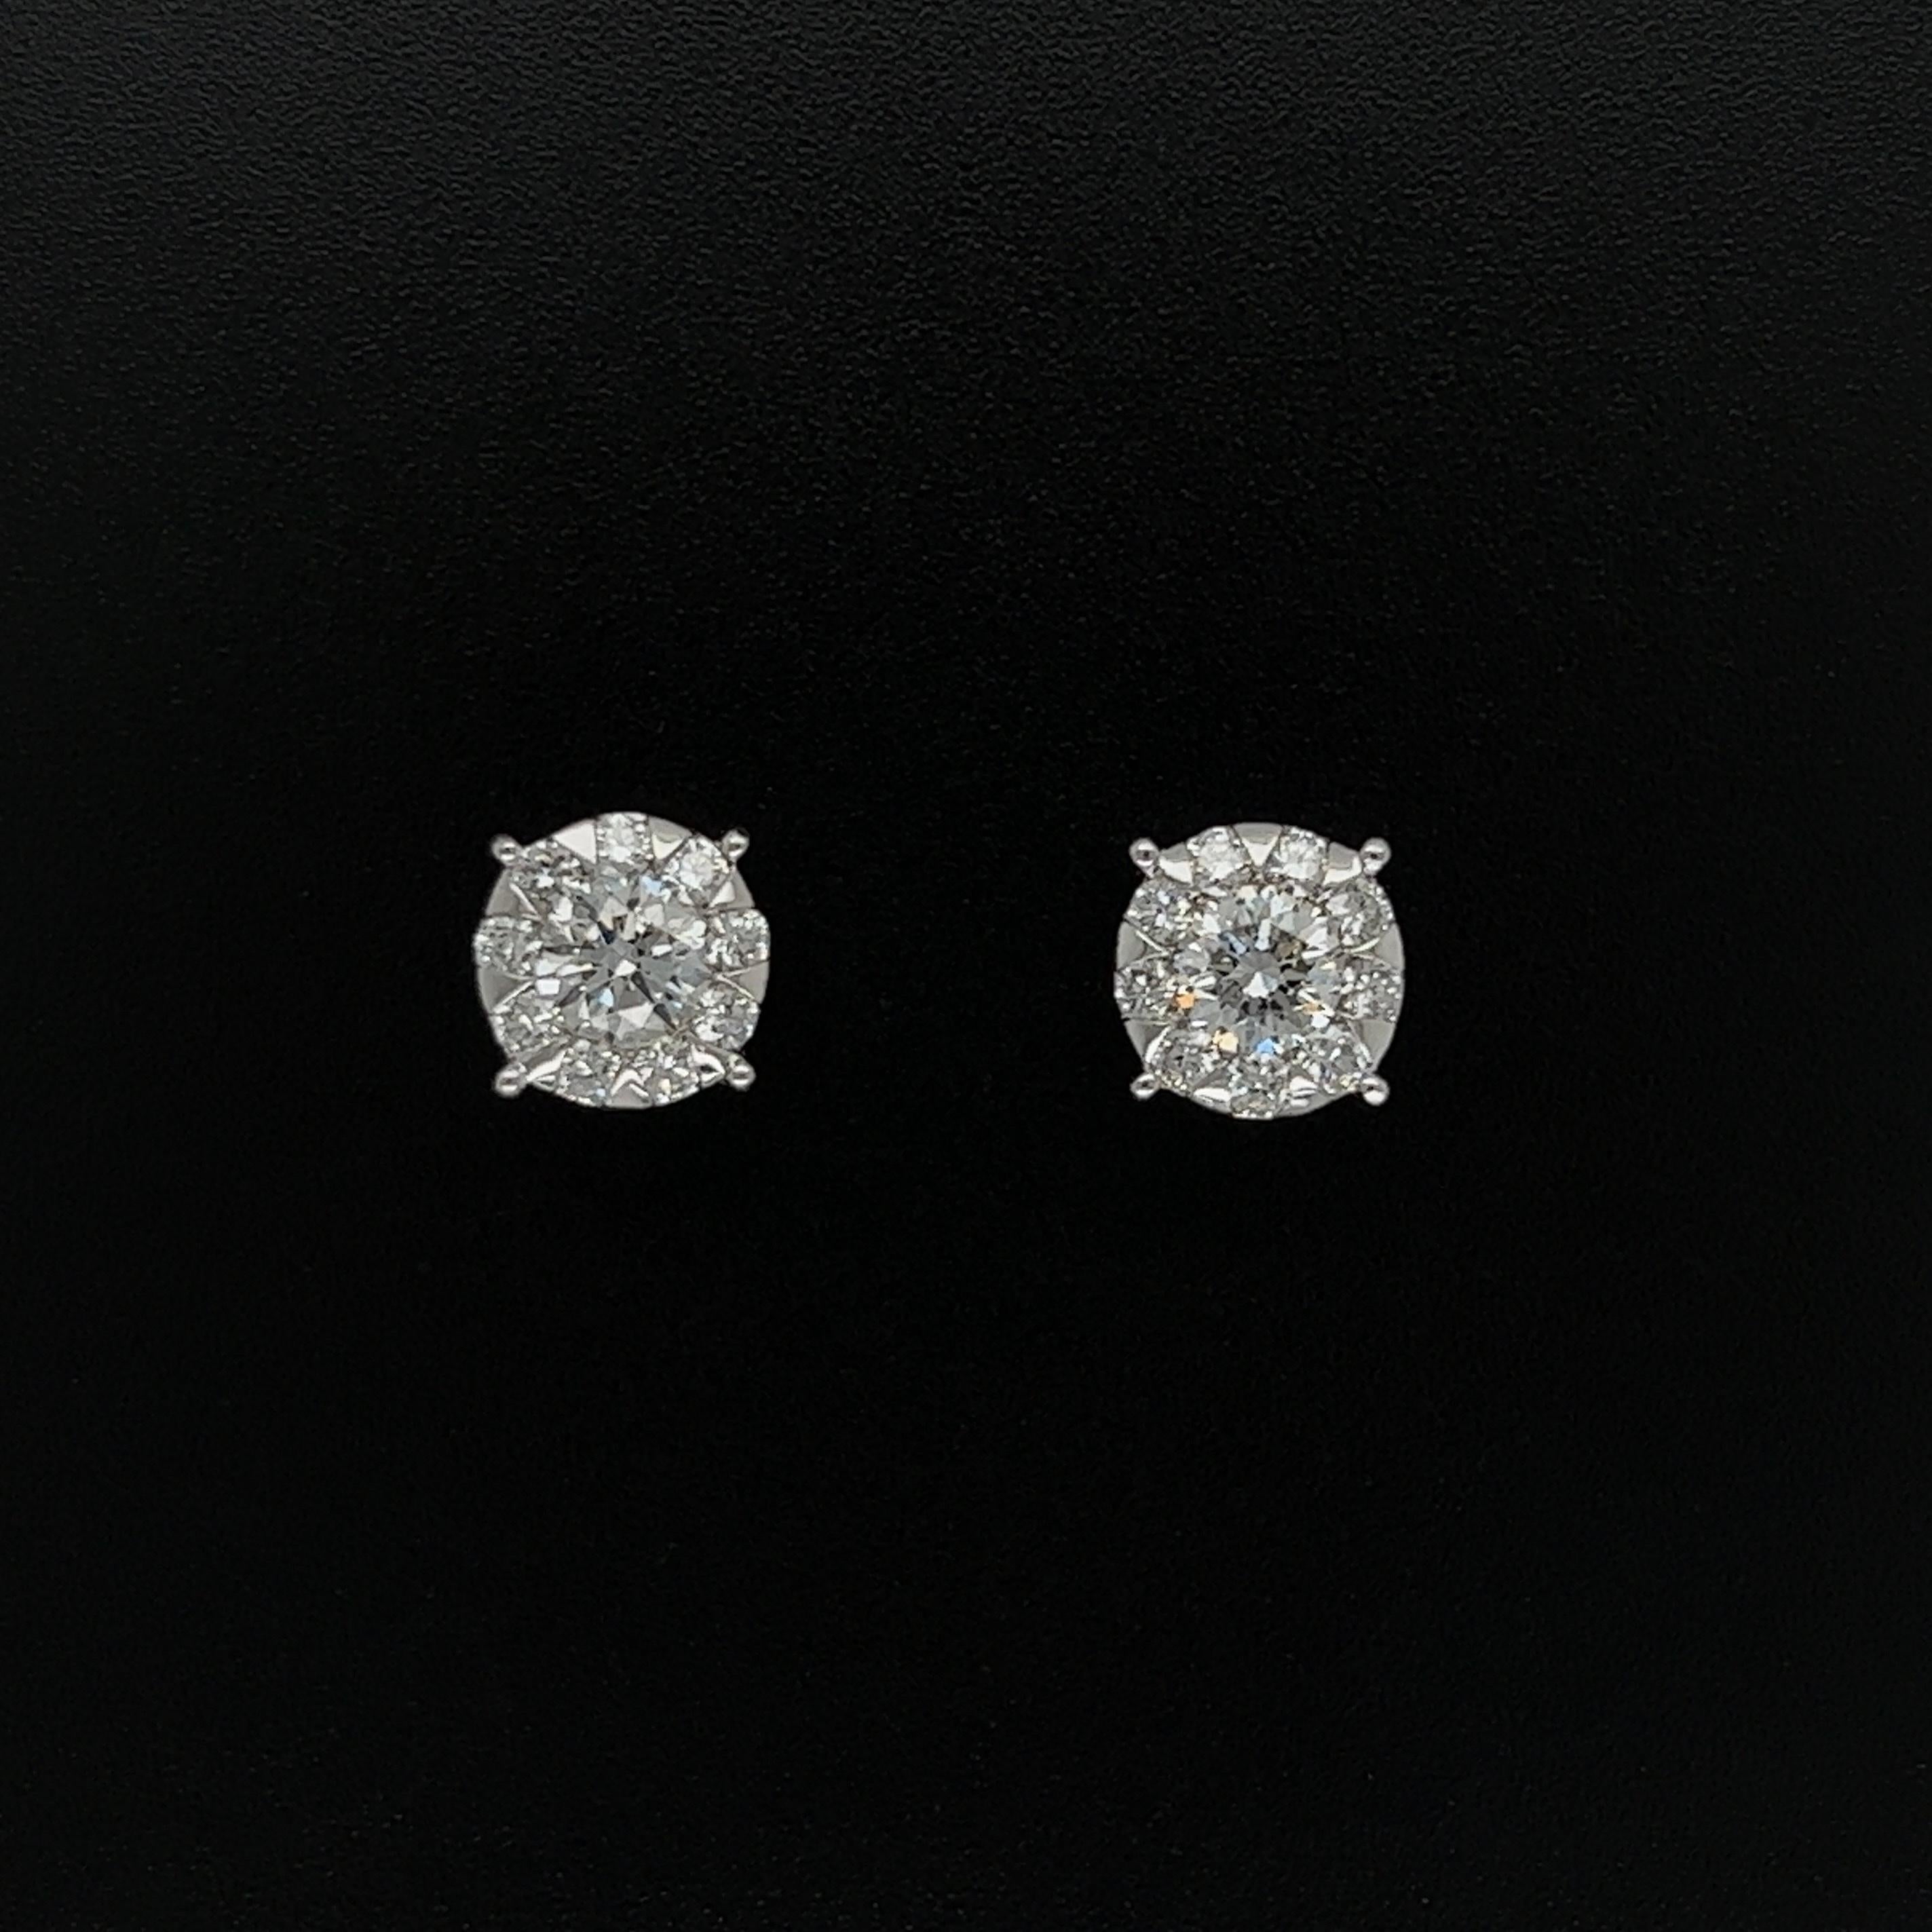 Simply Beautiful! Pair of round Diamond Cluster Gold 7.4mm Stud Earrings. Securely nestled and Hand set in 18 Karat white Gold four-claw setting. Diamonds weighing approx. 1.03tcw. Measuring approx. 0.65”L x 0.35”W x 0.85”H x 0.35” h. These earrings